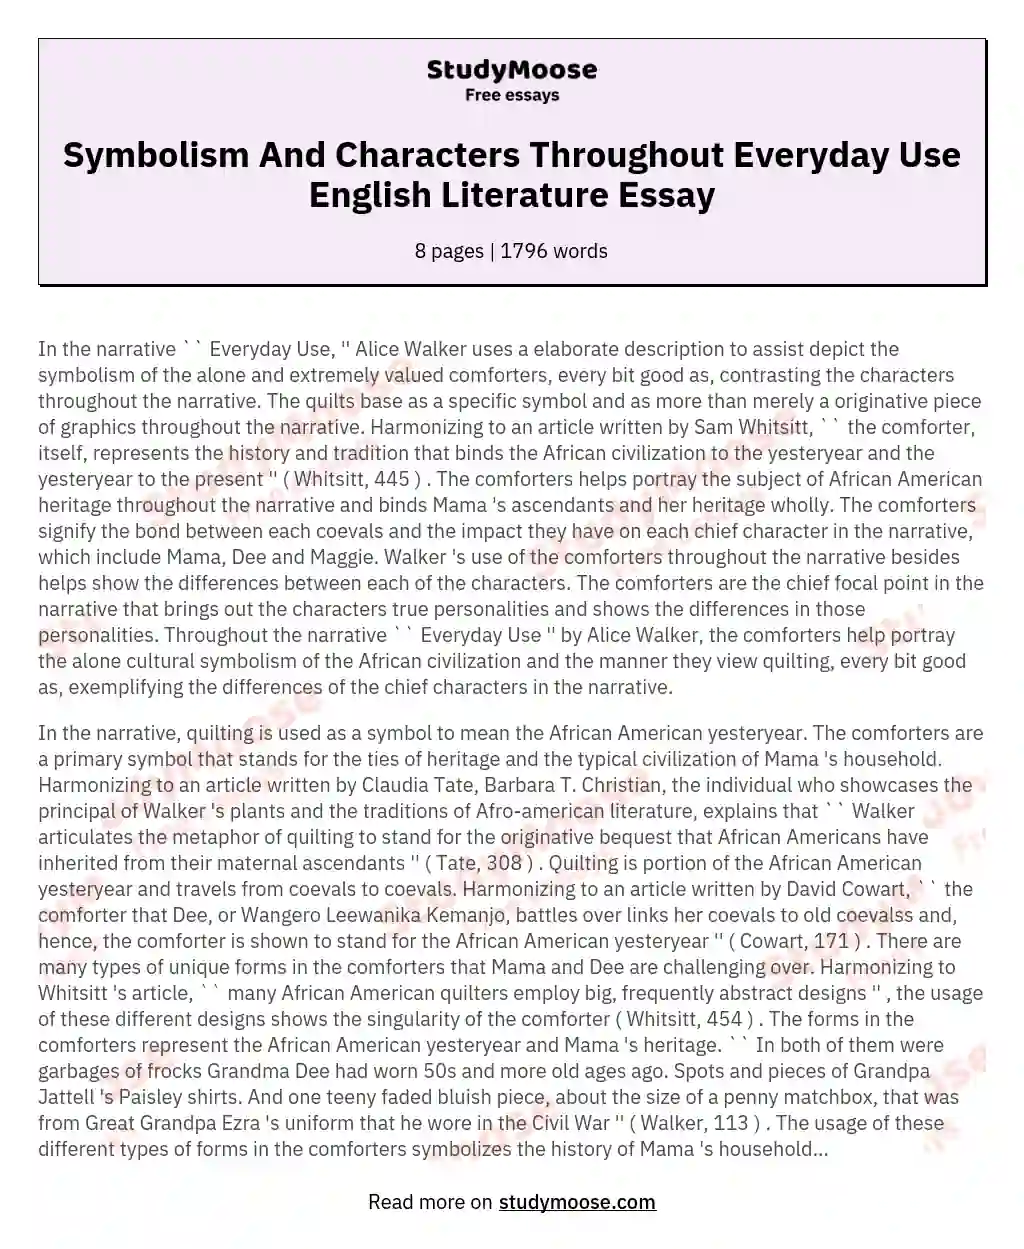 Symbolism And Characters Throughout Everyday Use English Literature Essay essay